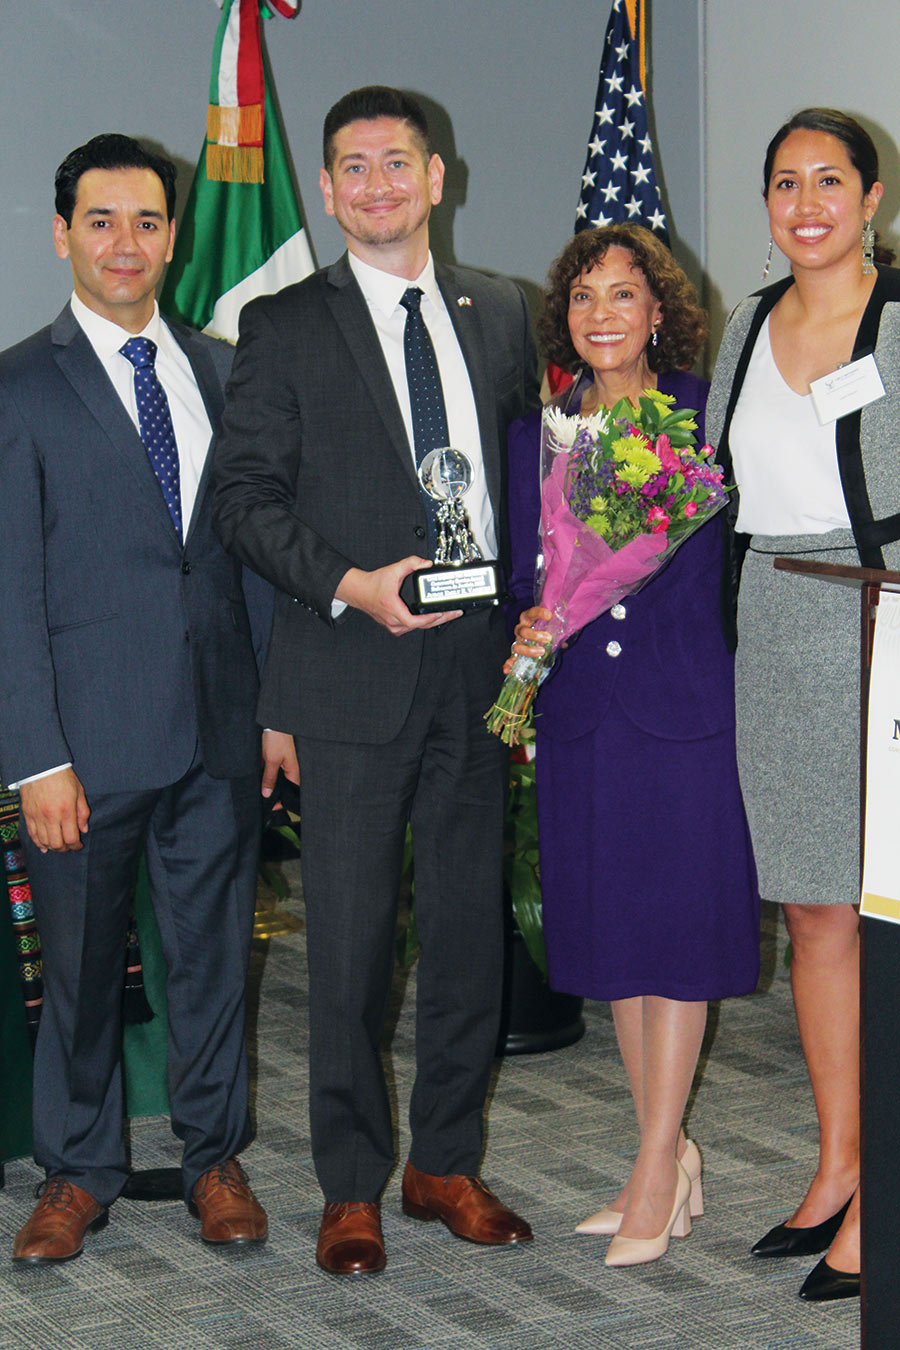 A portrait photograph of Emily Vasquez (second from right) smiling as she poses for a picture being recognized for an award